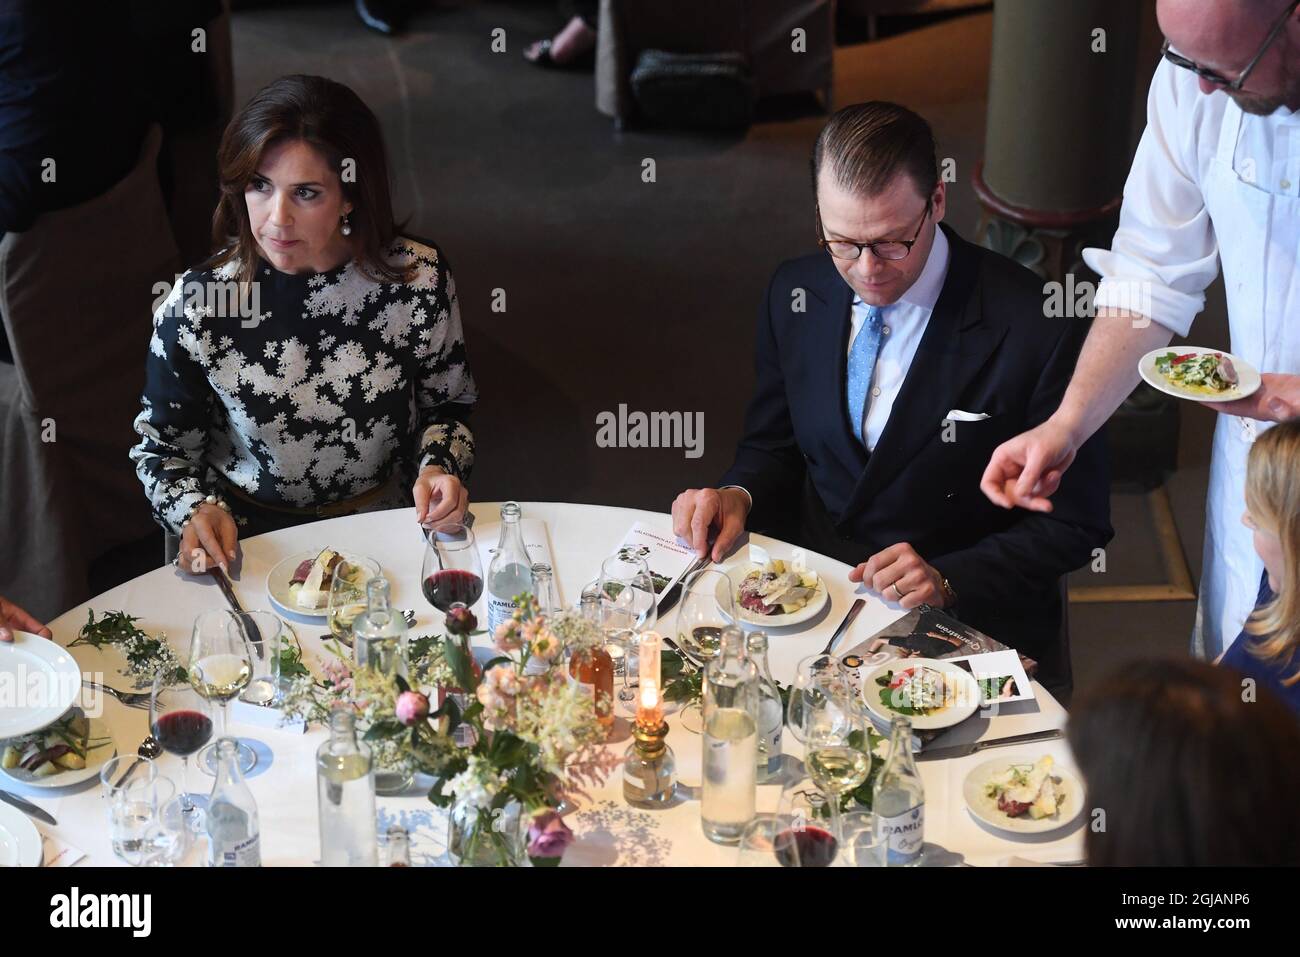 STOCKHOLM 20170530 Crown Princess Mary of Denmark and Prince Daniel of Sweden taste the food coked by Swedish and Danish chefs during a food and tourism event held at the Old National archive in Stockholm Sweden on Tuesday. The Danish Crown Prince couple are on an official visit to Sweden. Photo: Fredrik Sandberg / TT / kod 10080  Stock Photo